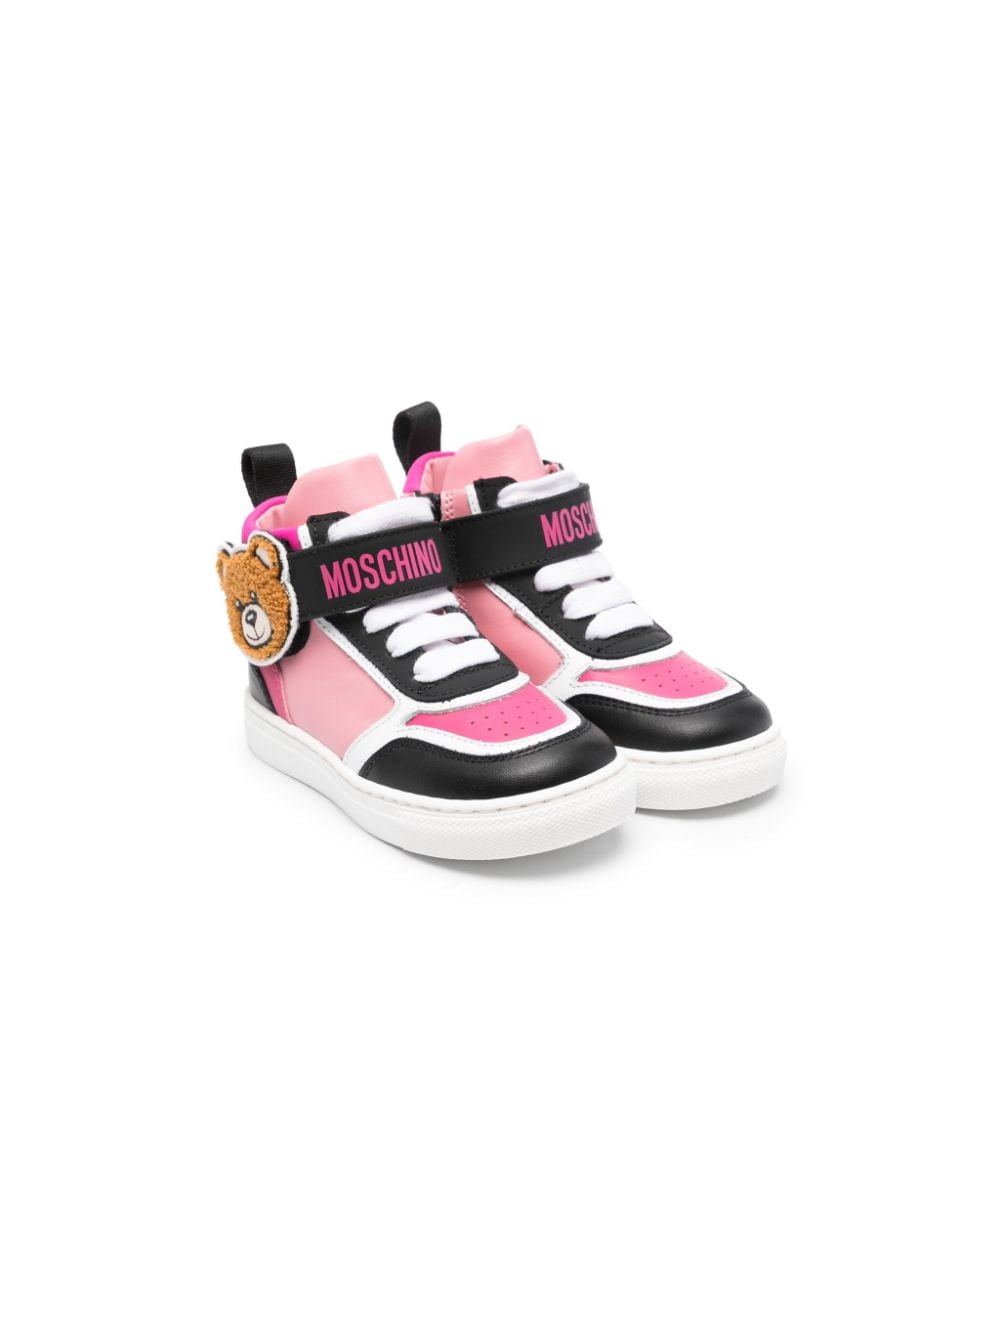 Moschino Kids high-top leather sneakers - Pink von Moschino Kids